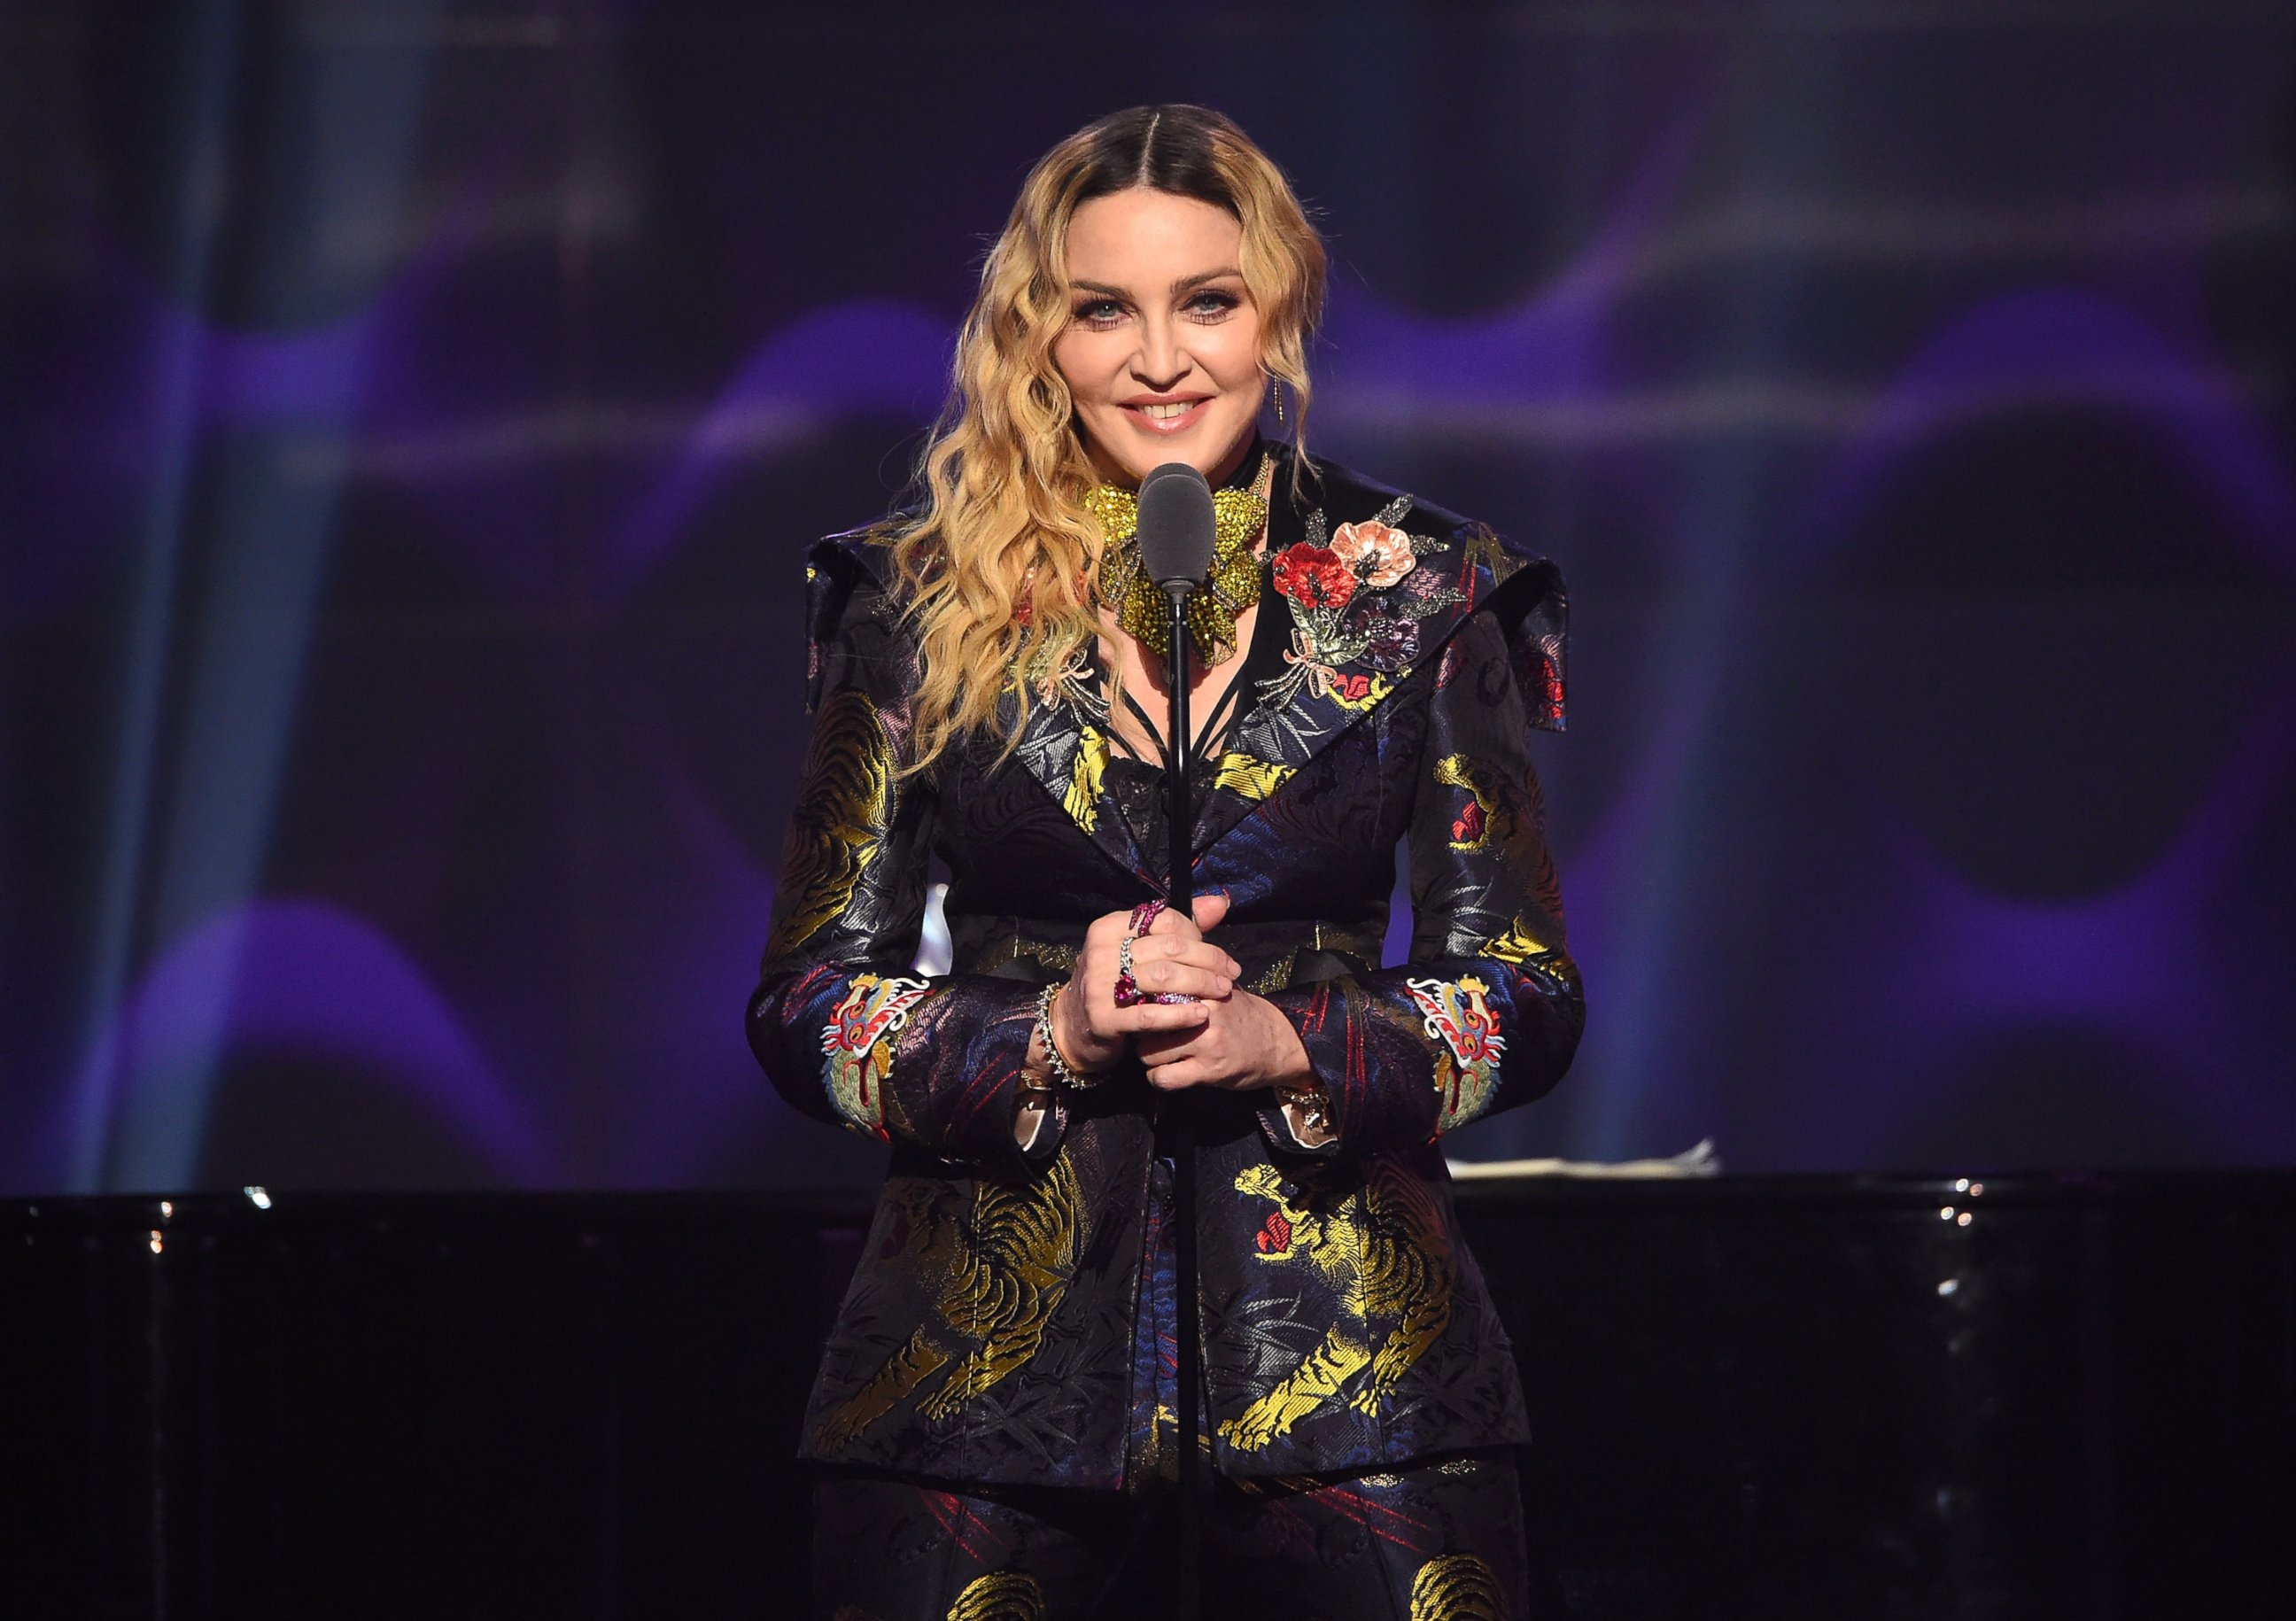 PHOTO: Madonna speaks on stage at the Billboard Women in Music 2016 event, Dec. 9, 2016, in New York City.